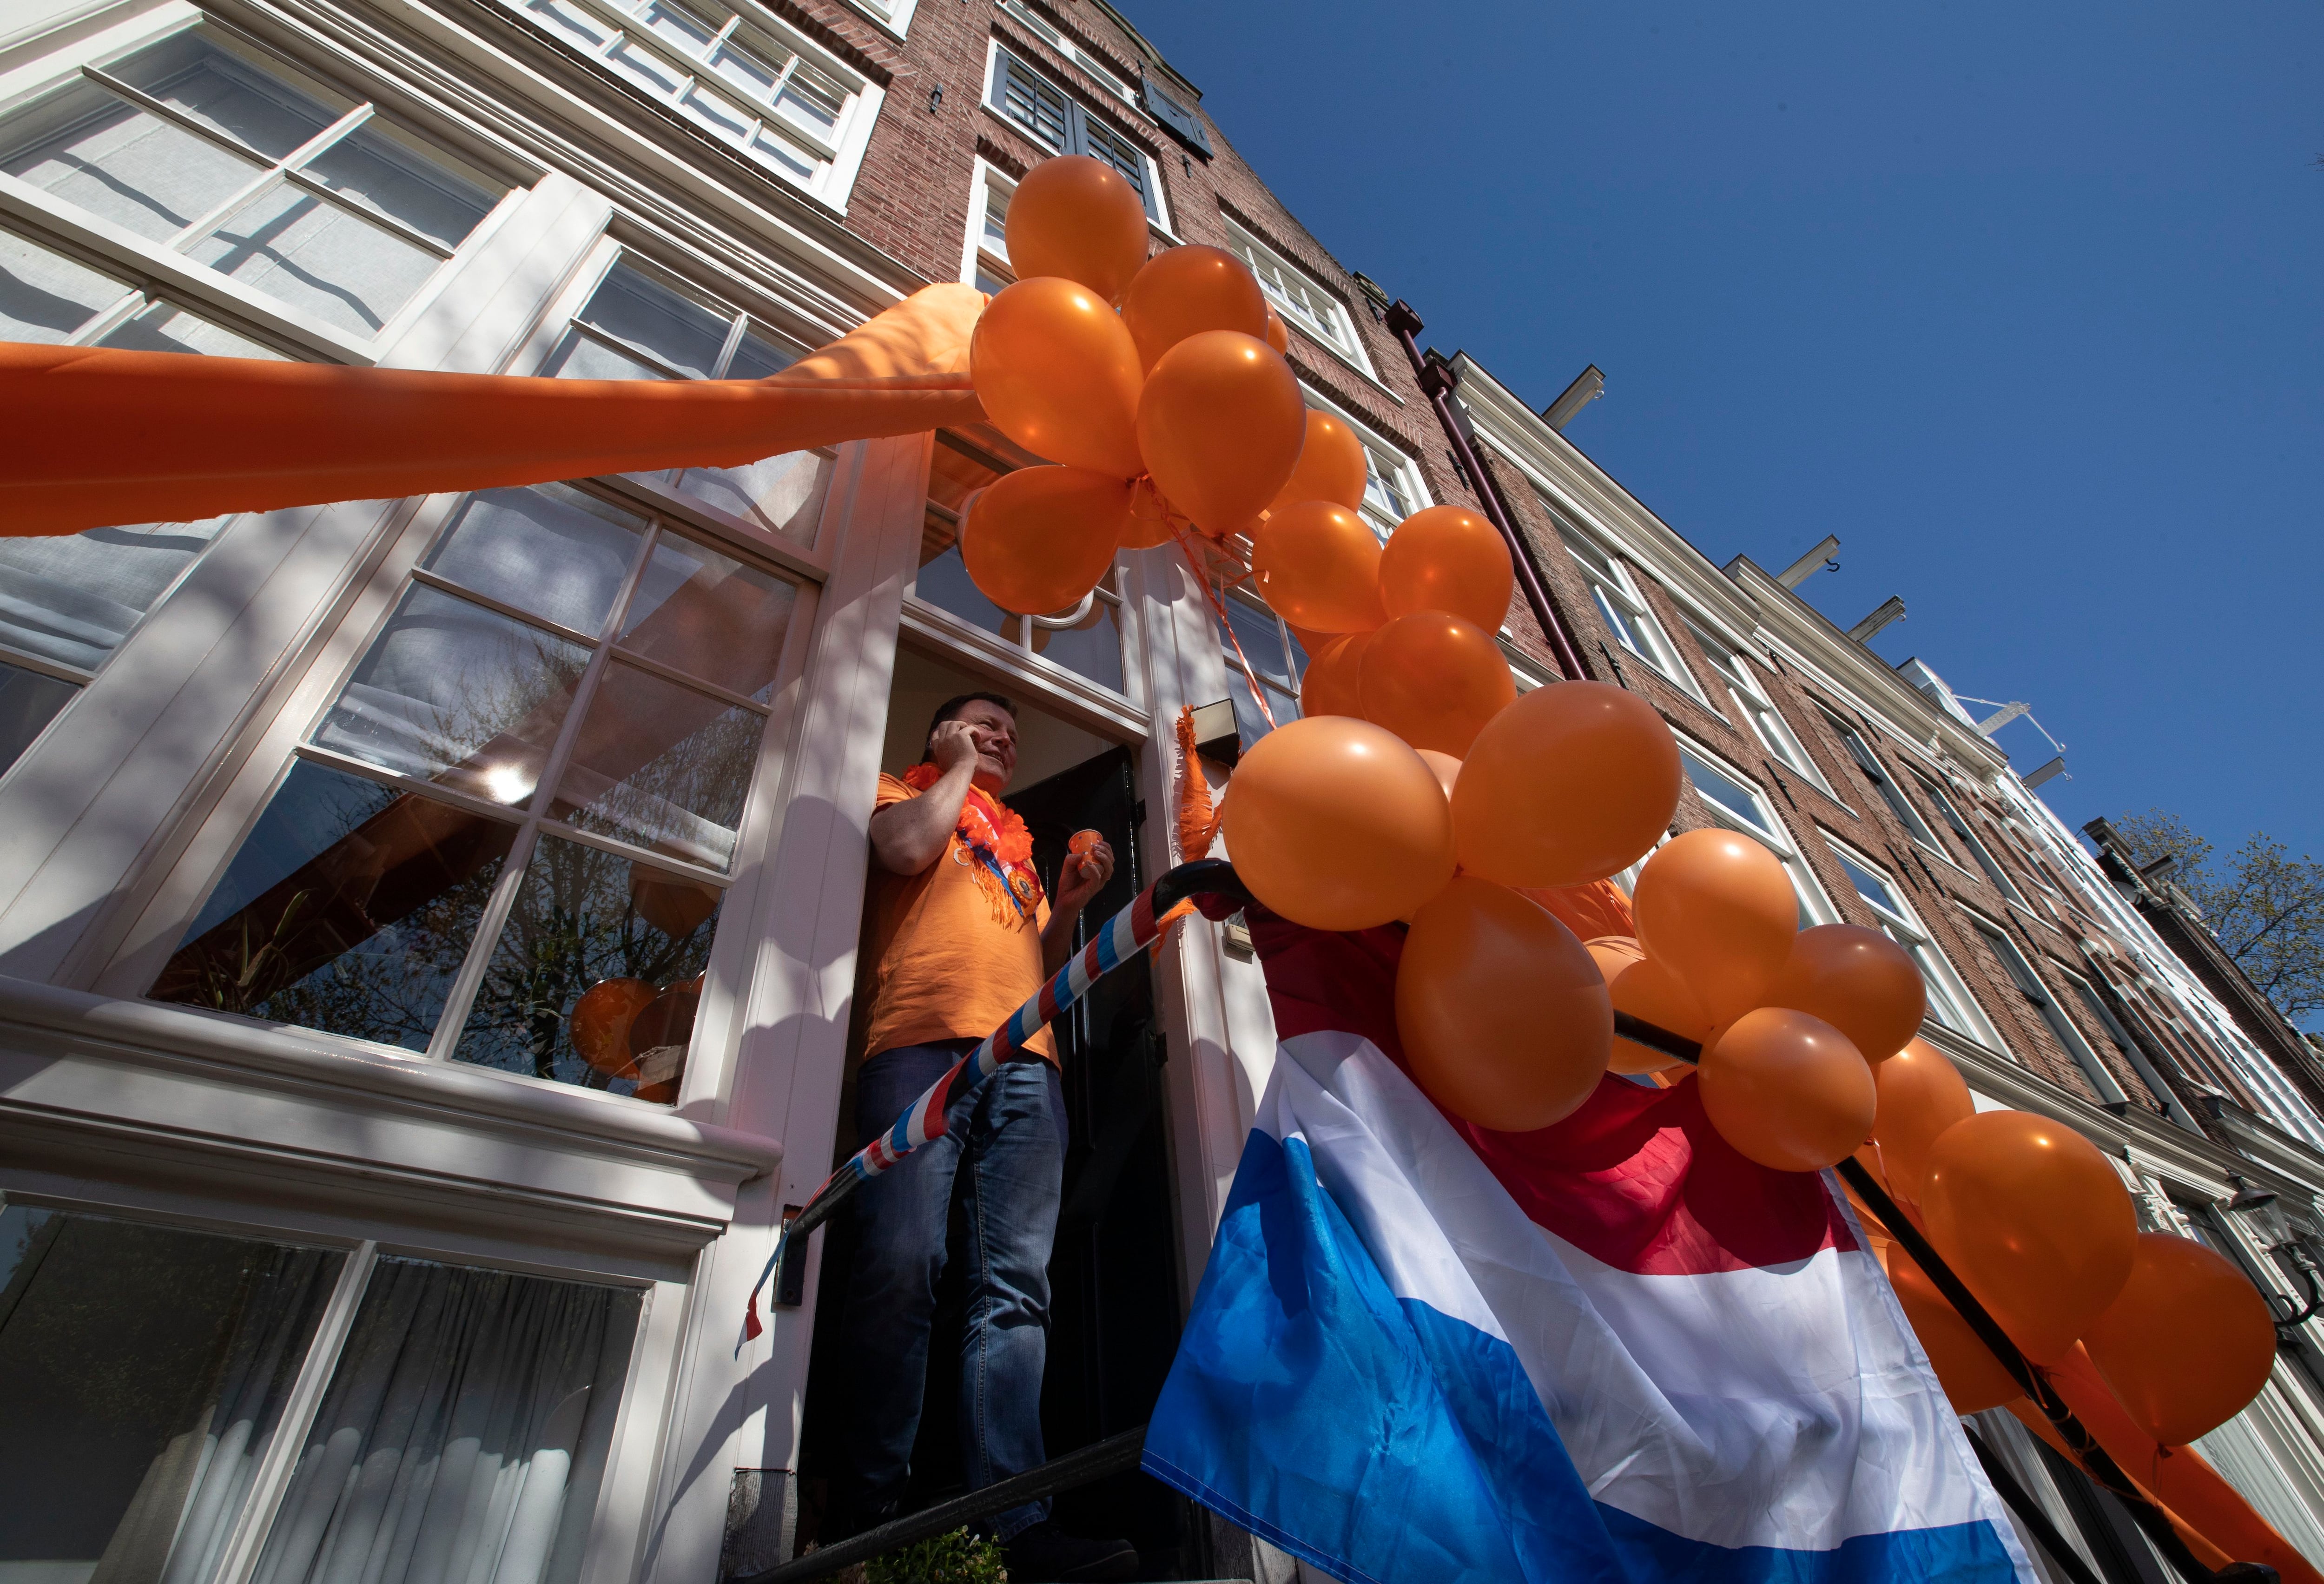 Muted celebrations of Dutch king’s birthday amid pandemic